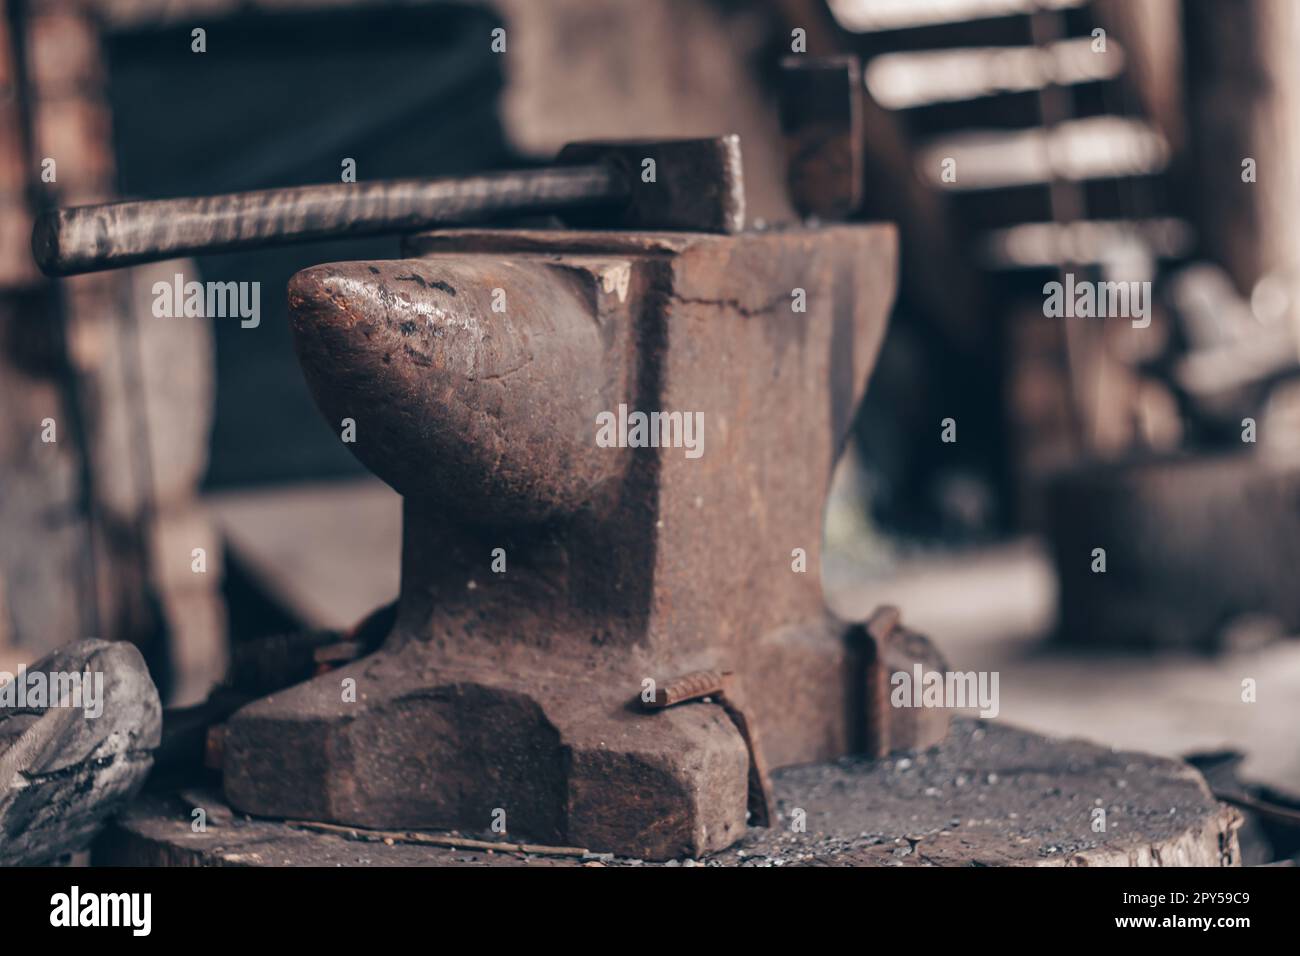 Process metal with hammer on anvil in forge. Strike iron outdoors in workshop. Metalworking, blacksmithing. Stock Photo